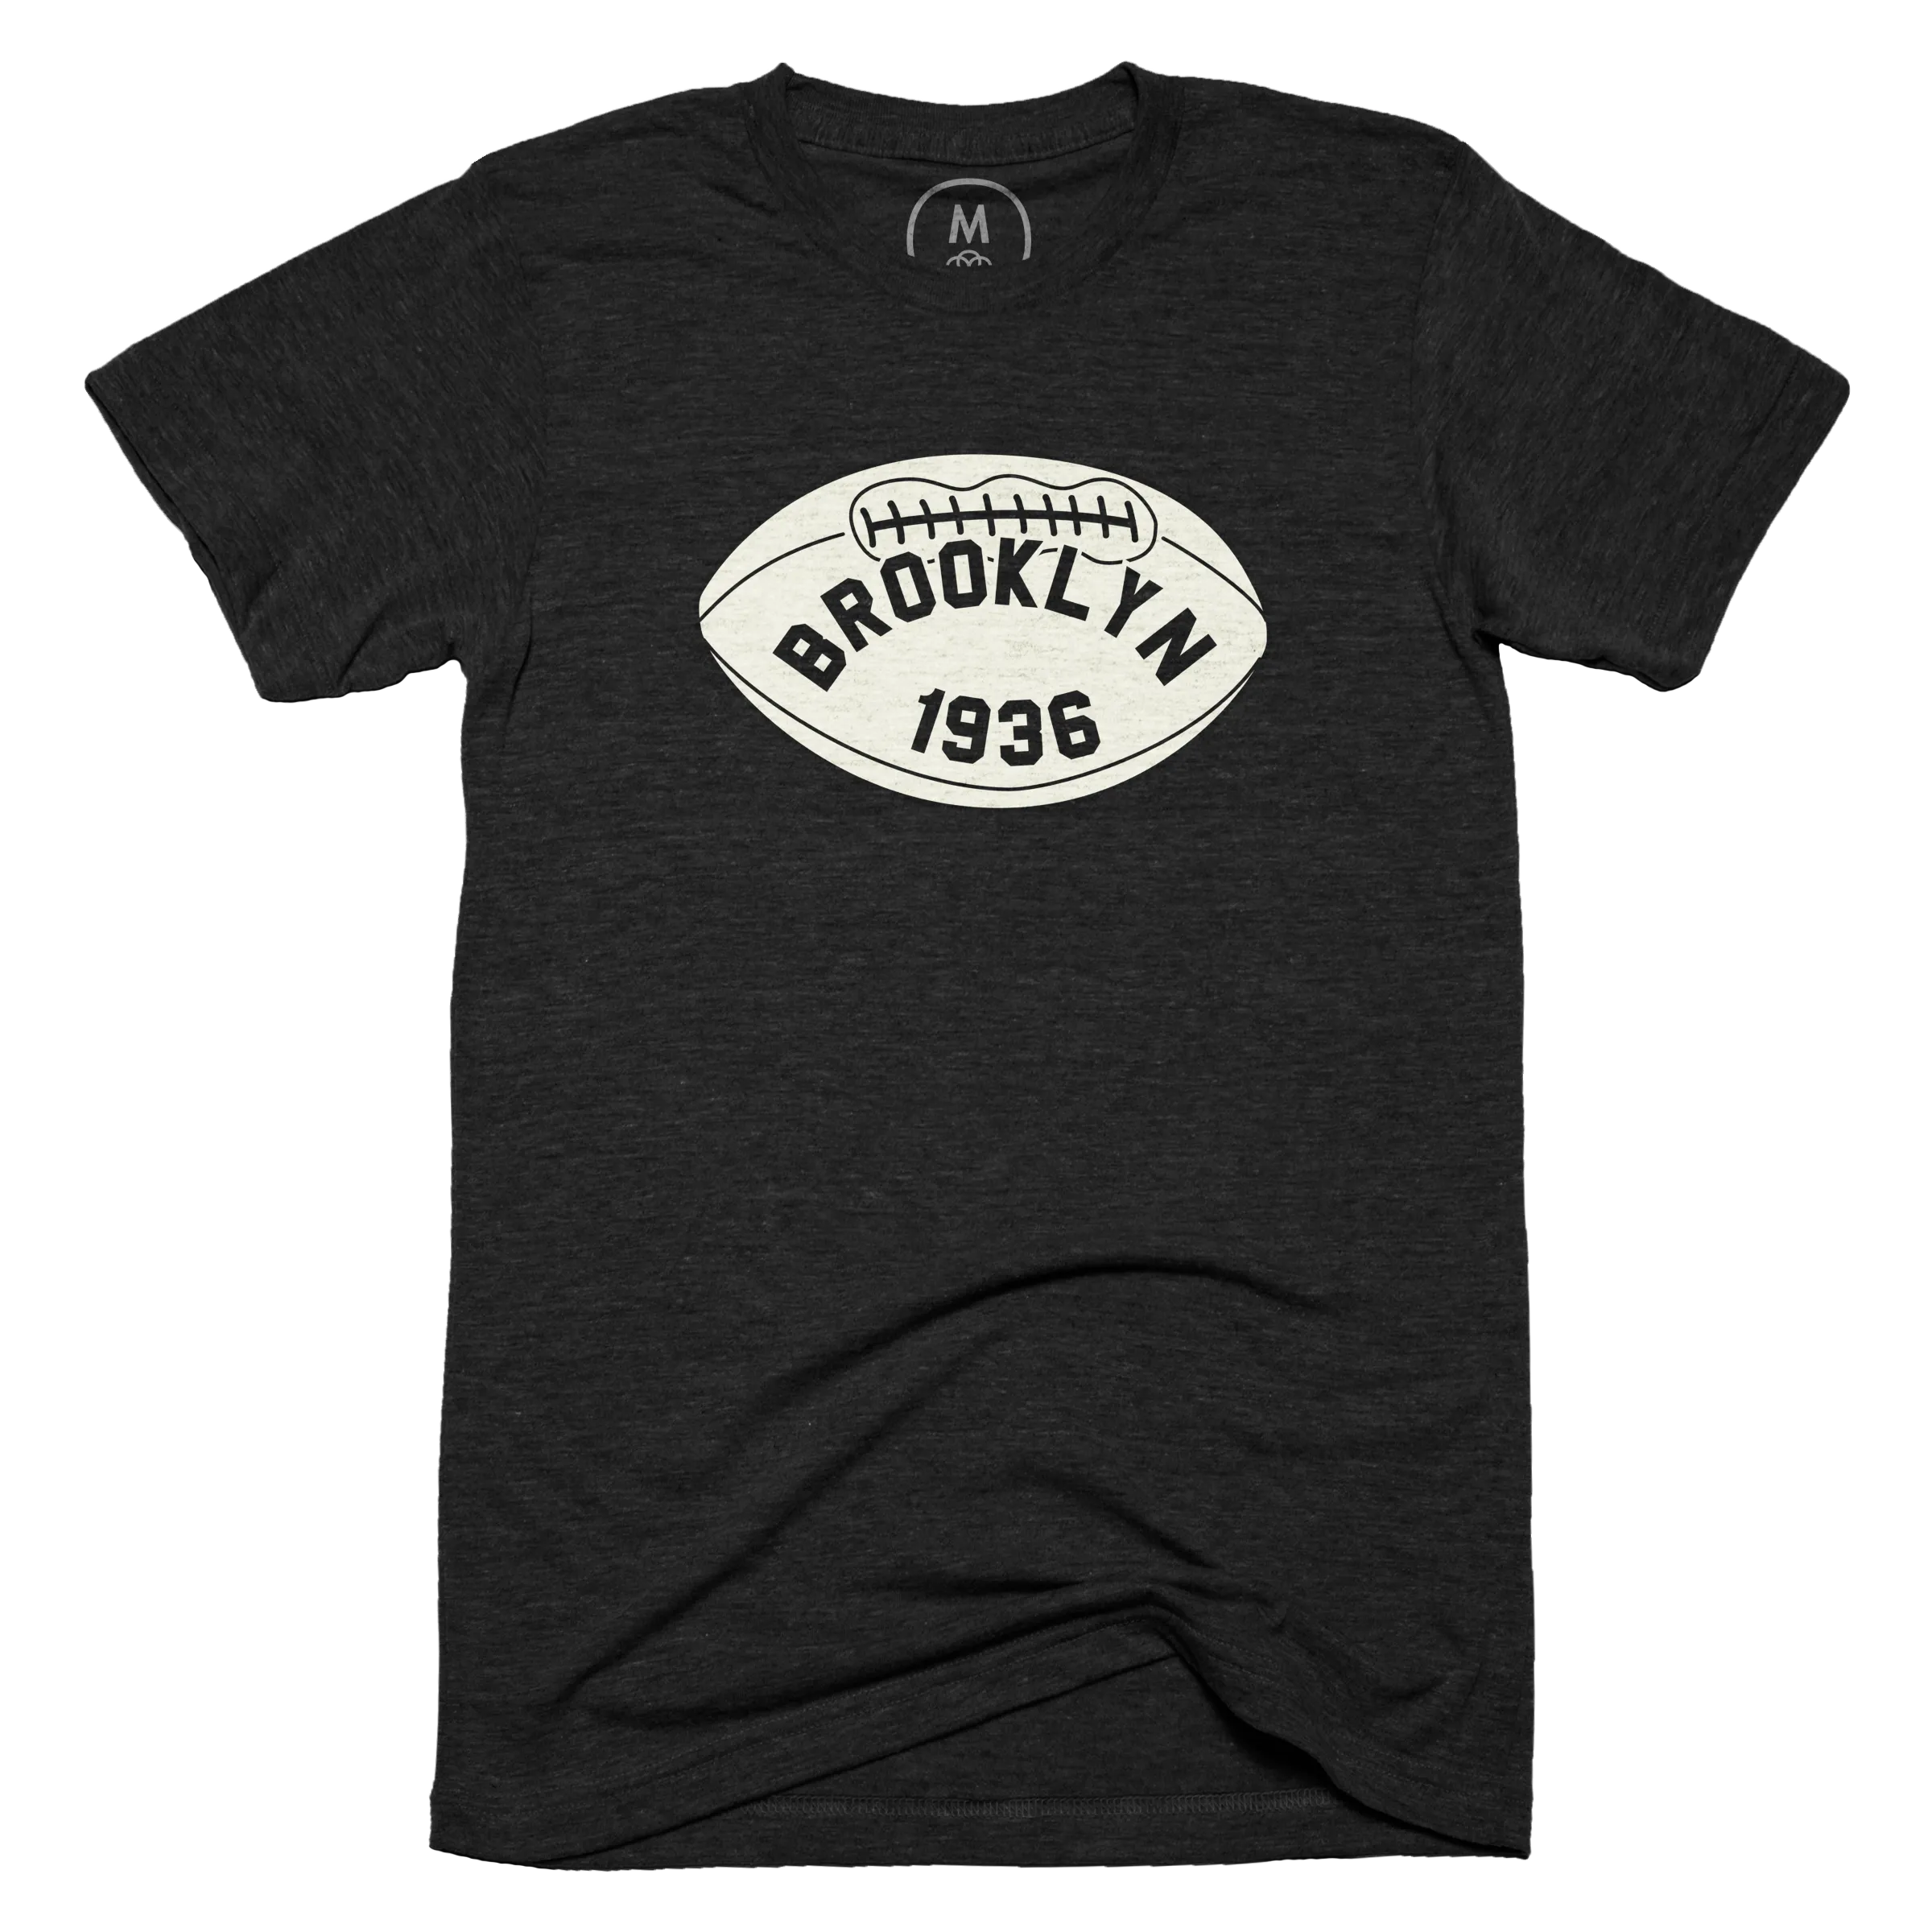 Brooklyn Football” graphic tee, pullover hoodie, and tank by 59 Apparel.